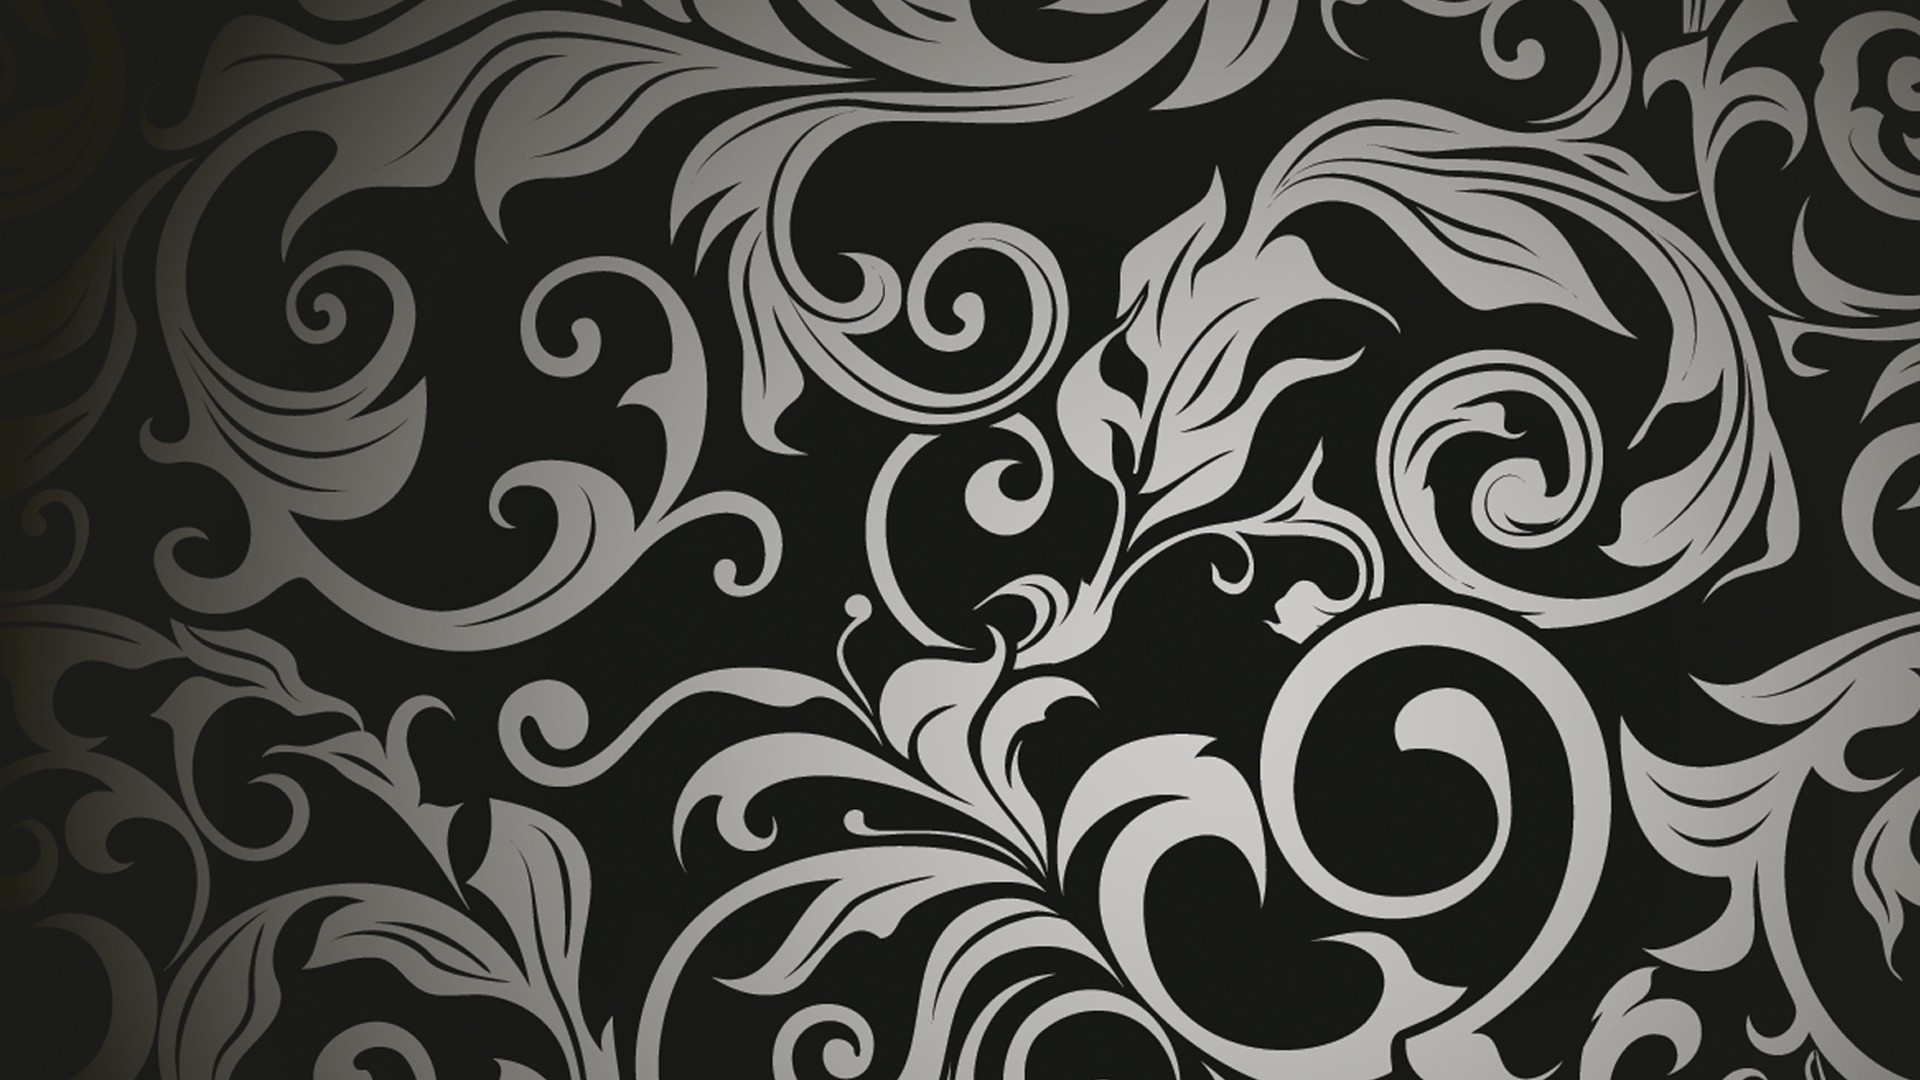 Black And White Vintage Wallpaper Images #c4a • Abstract at .